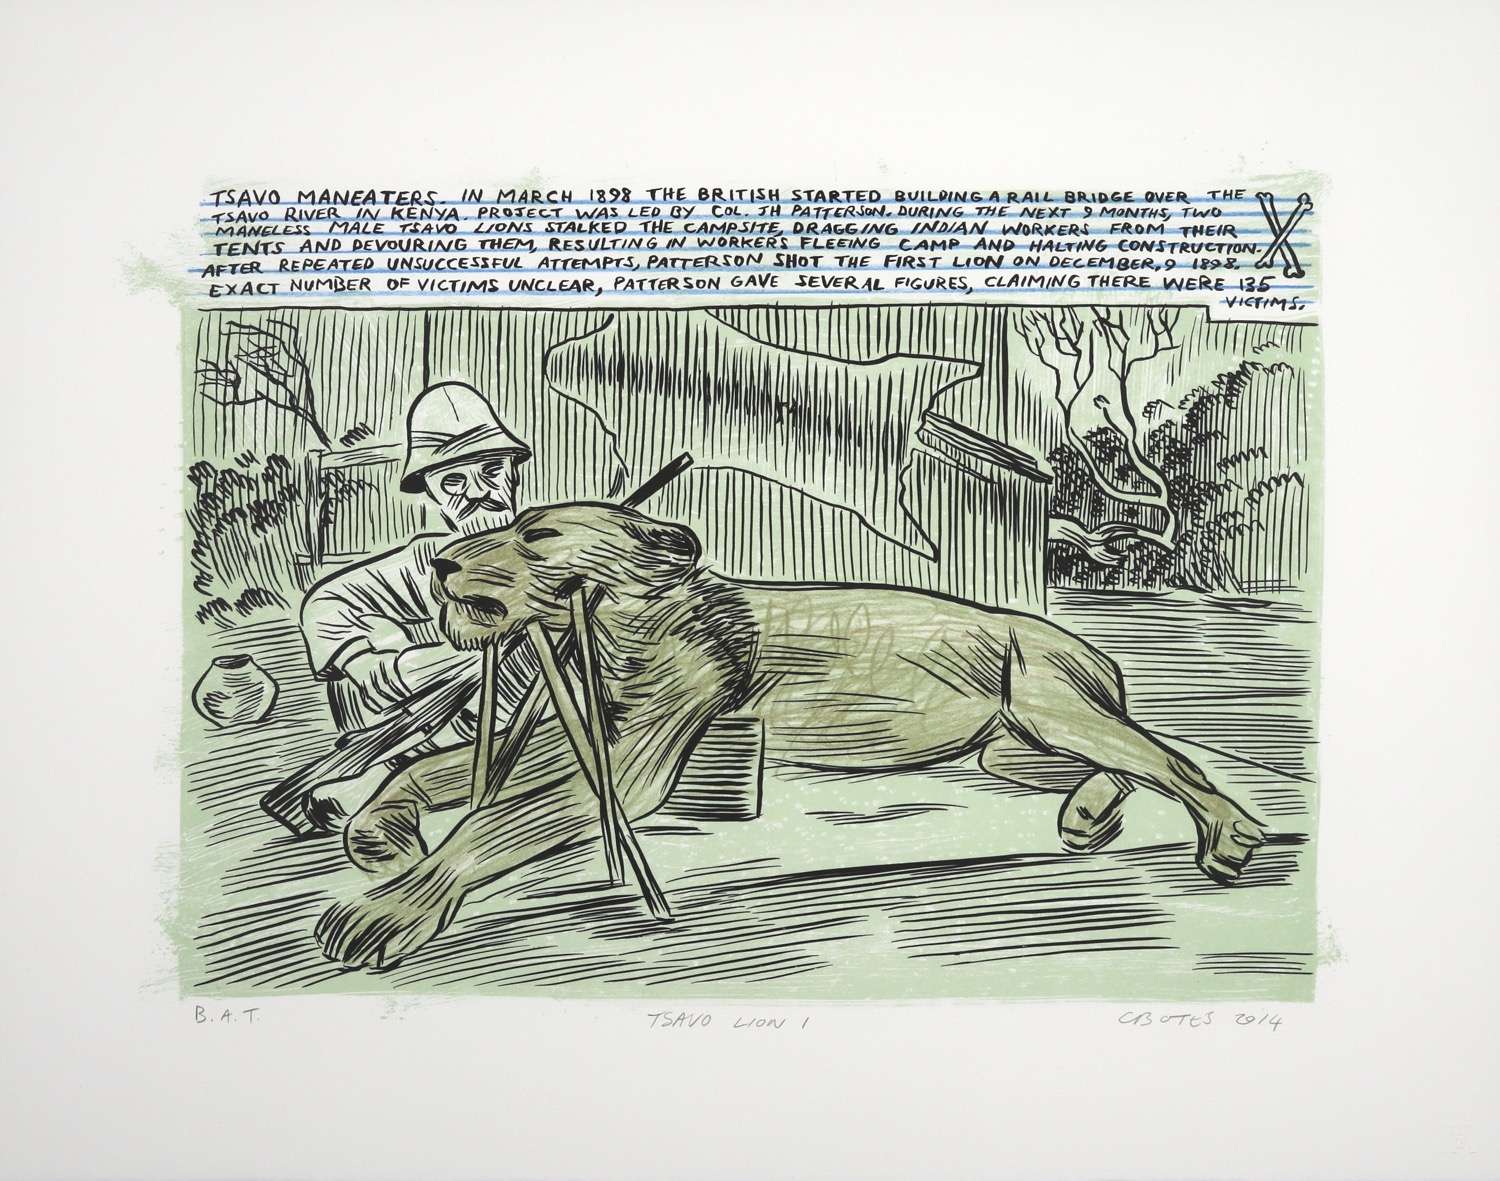 Dead lion propped up in front of hunter with pith helmet, drawn in comic style with explanatory text